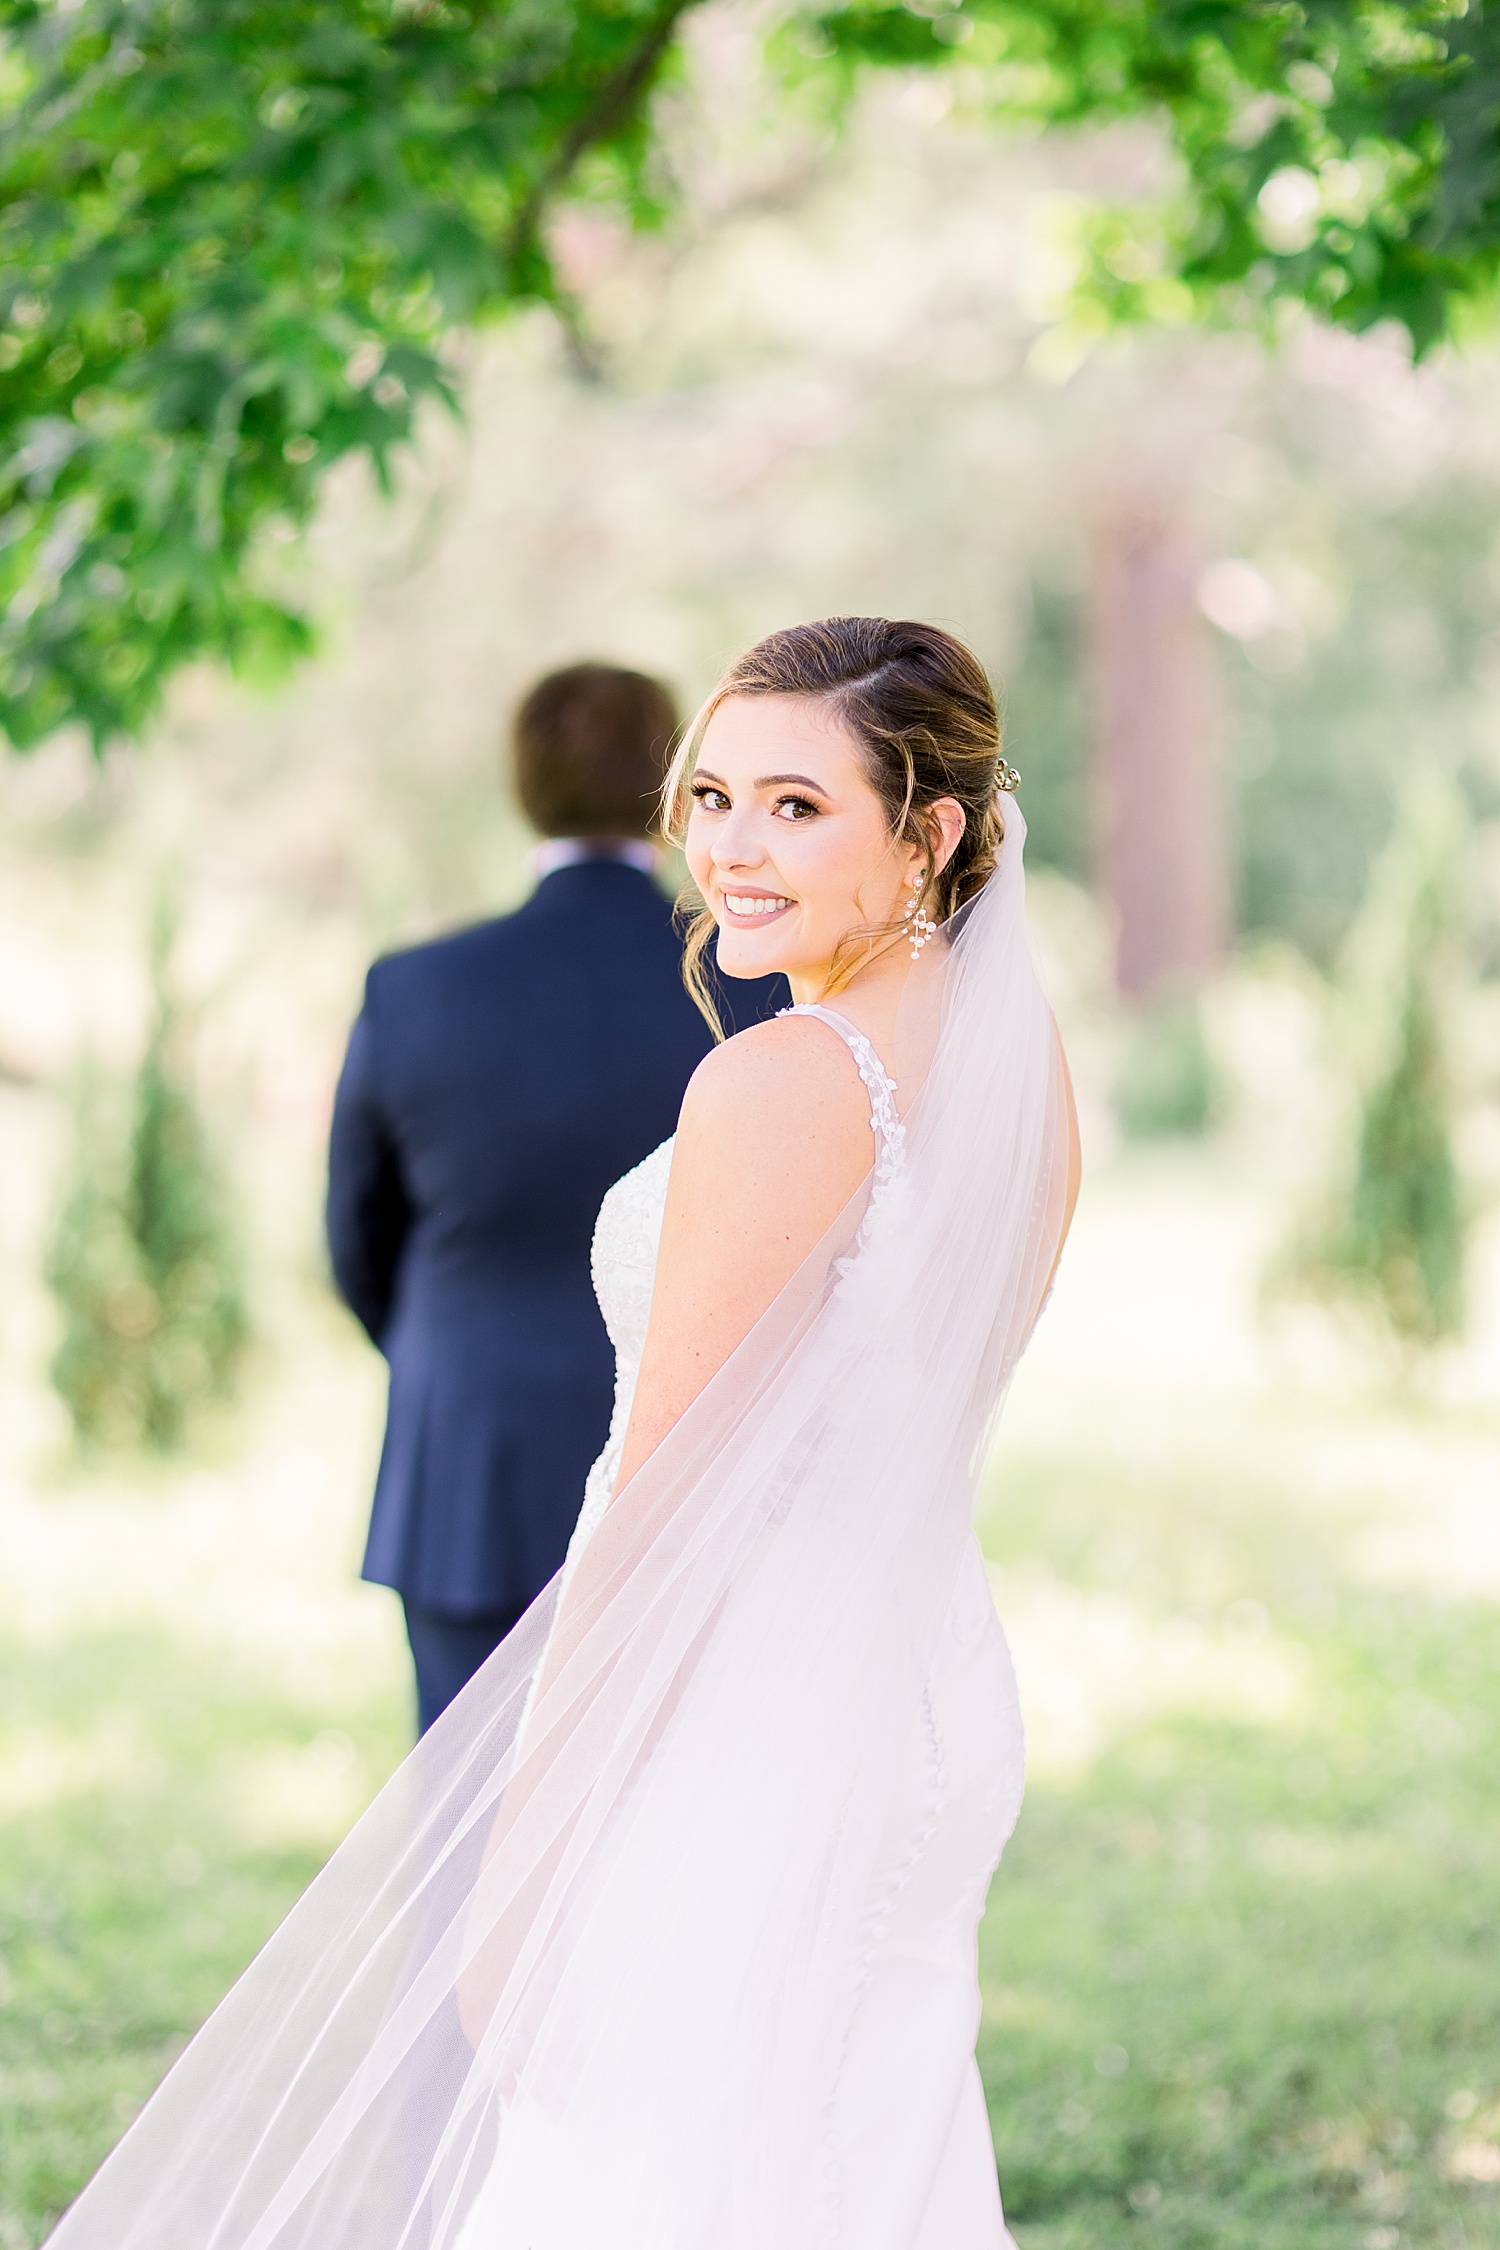 Bride waiting for groom to turn around during first look by Chelsea Morton Photography